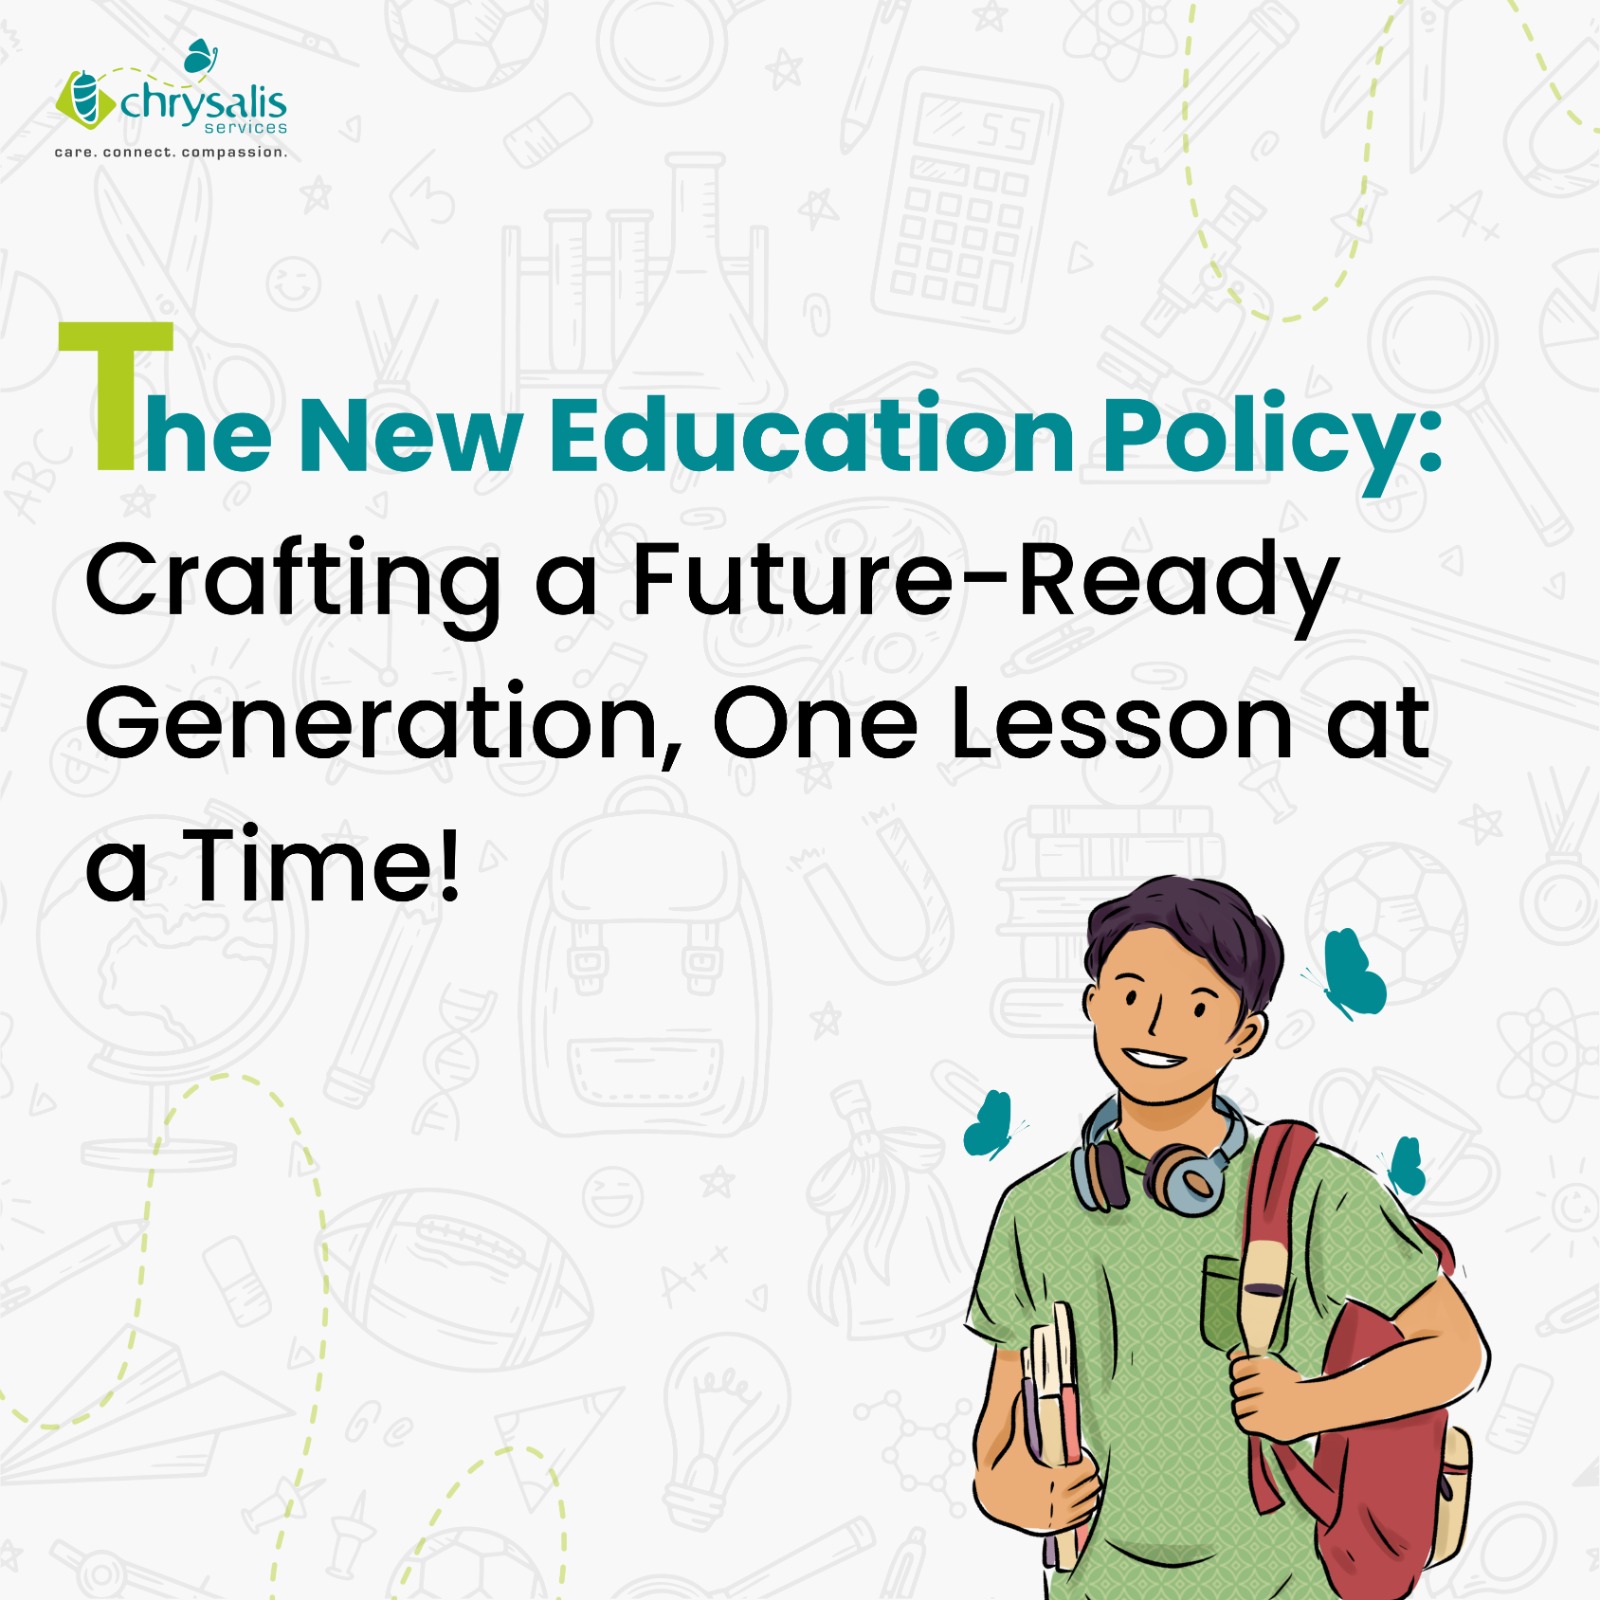 NEP Focus: Revolutionising Indian Education for Teachers, Students, and Learning